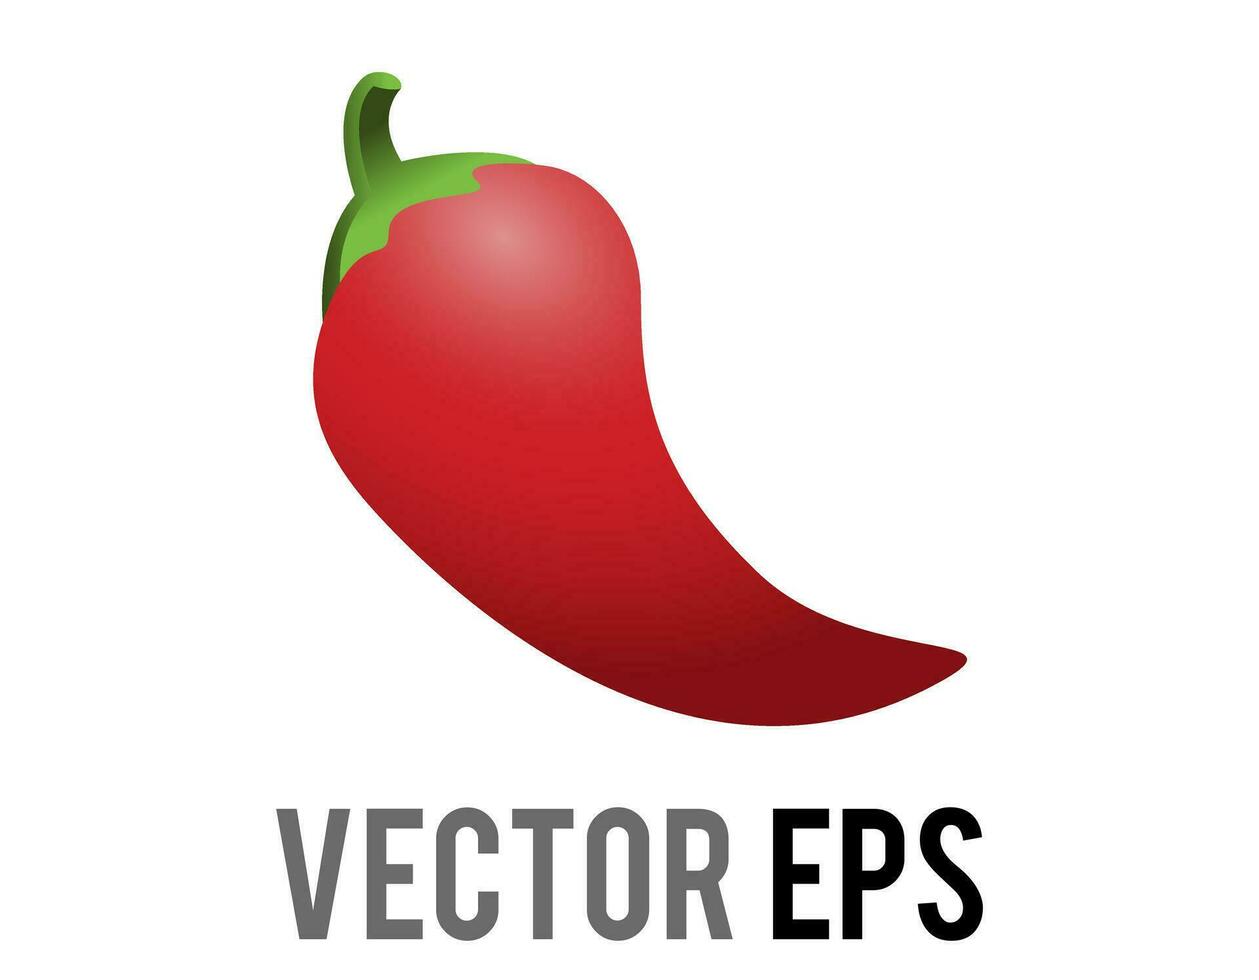 vector red curled Mexican chili pepper icon with green stem